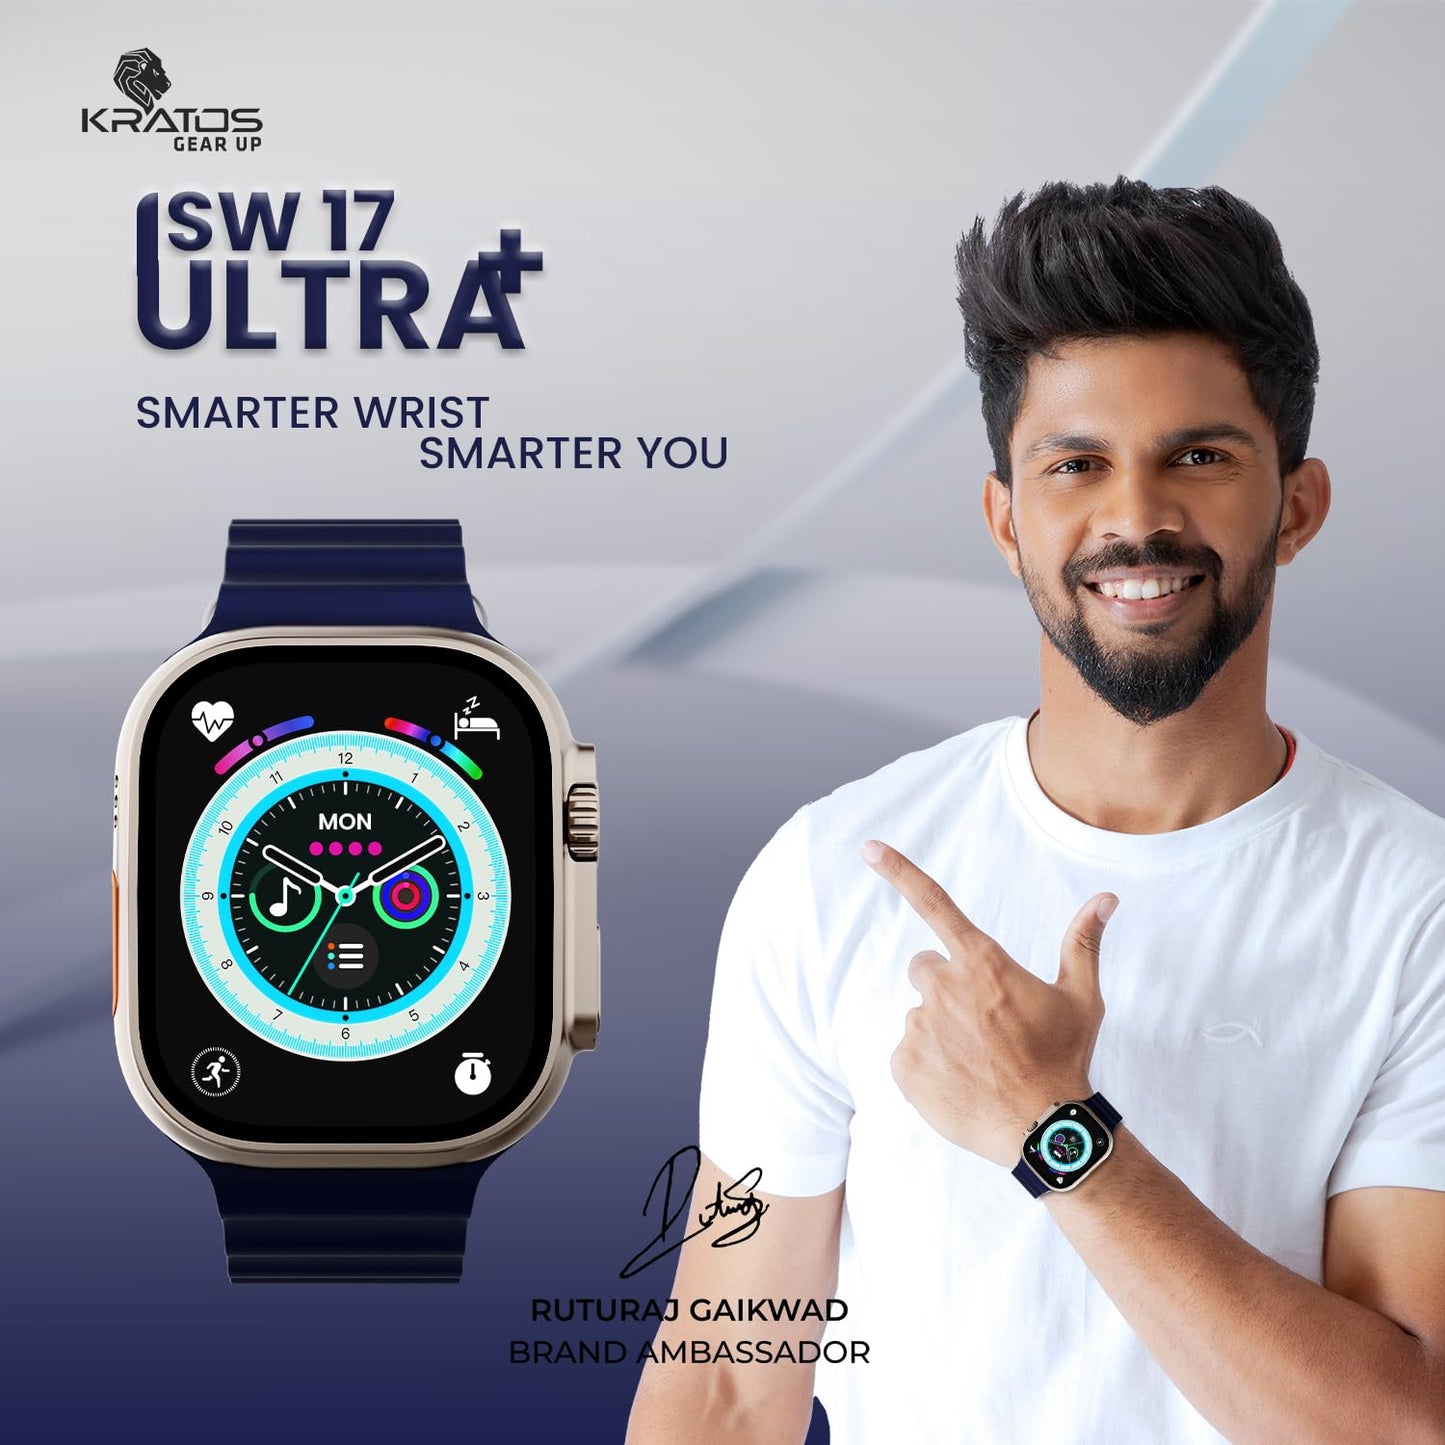 Kratos SW17 Ultra+ Smartwatch with 1.96" Touch Display, Advanced BT Calling, Wireless Charging Smart Watch, Voice Assistant, 100+ Sports Modes, Rotating Crown, Metallic Body, IP67, Heart Rate, SpO2